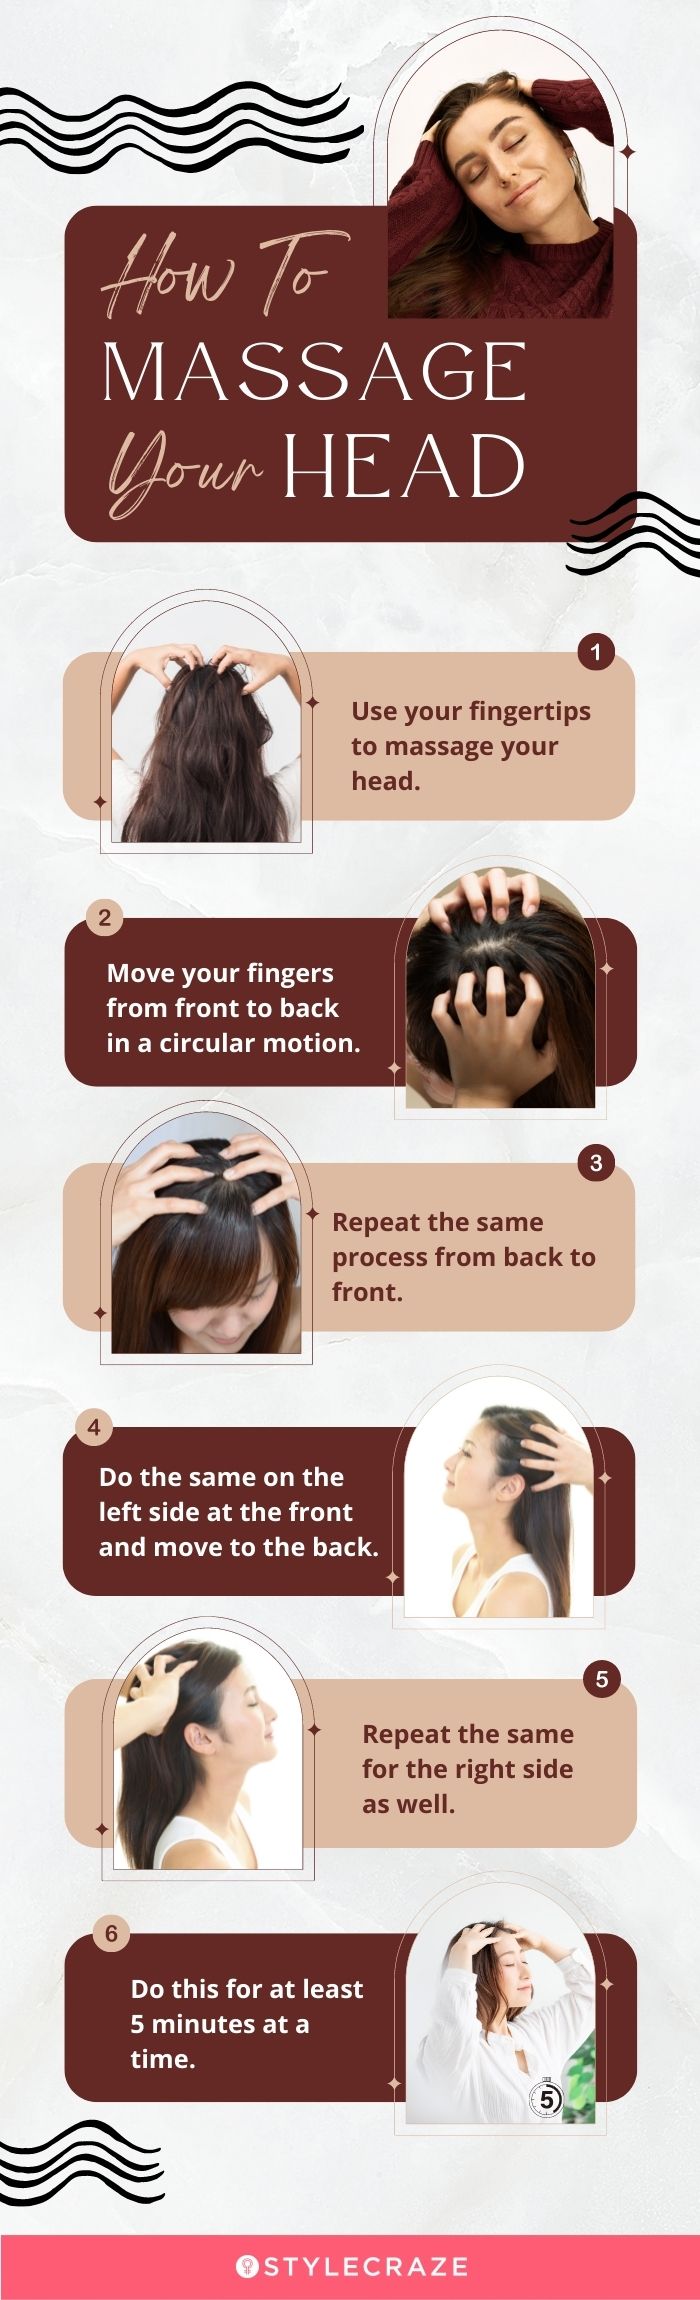 how to massage your head [infographic]